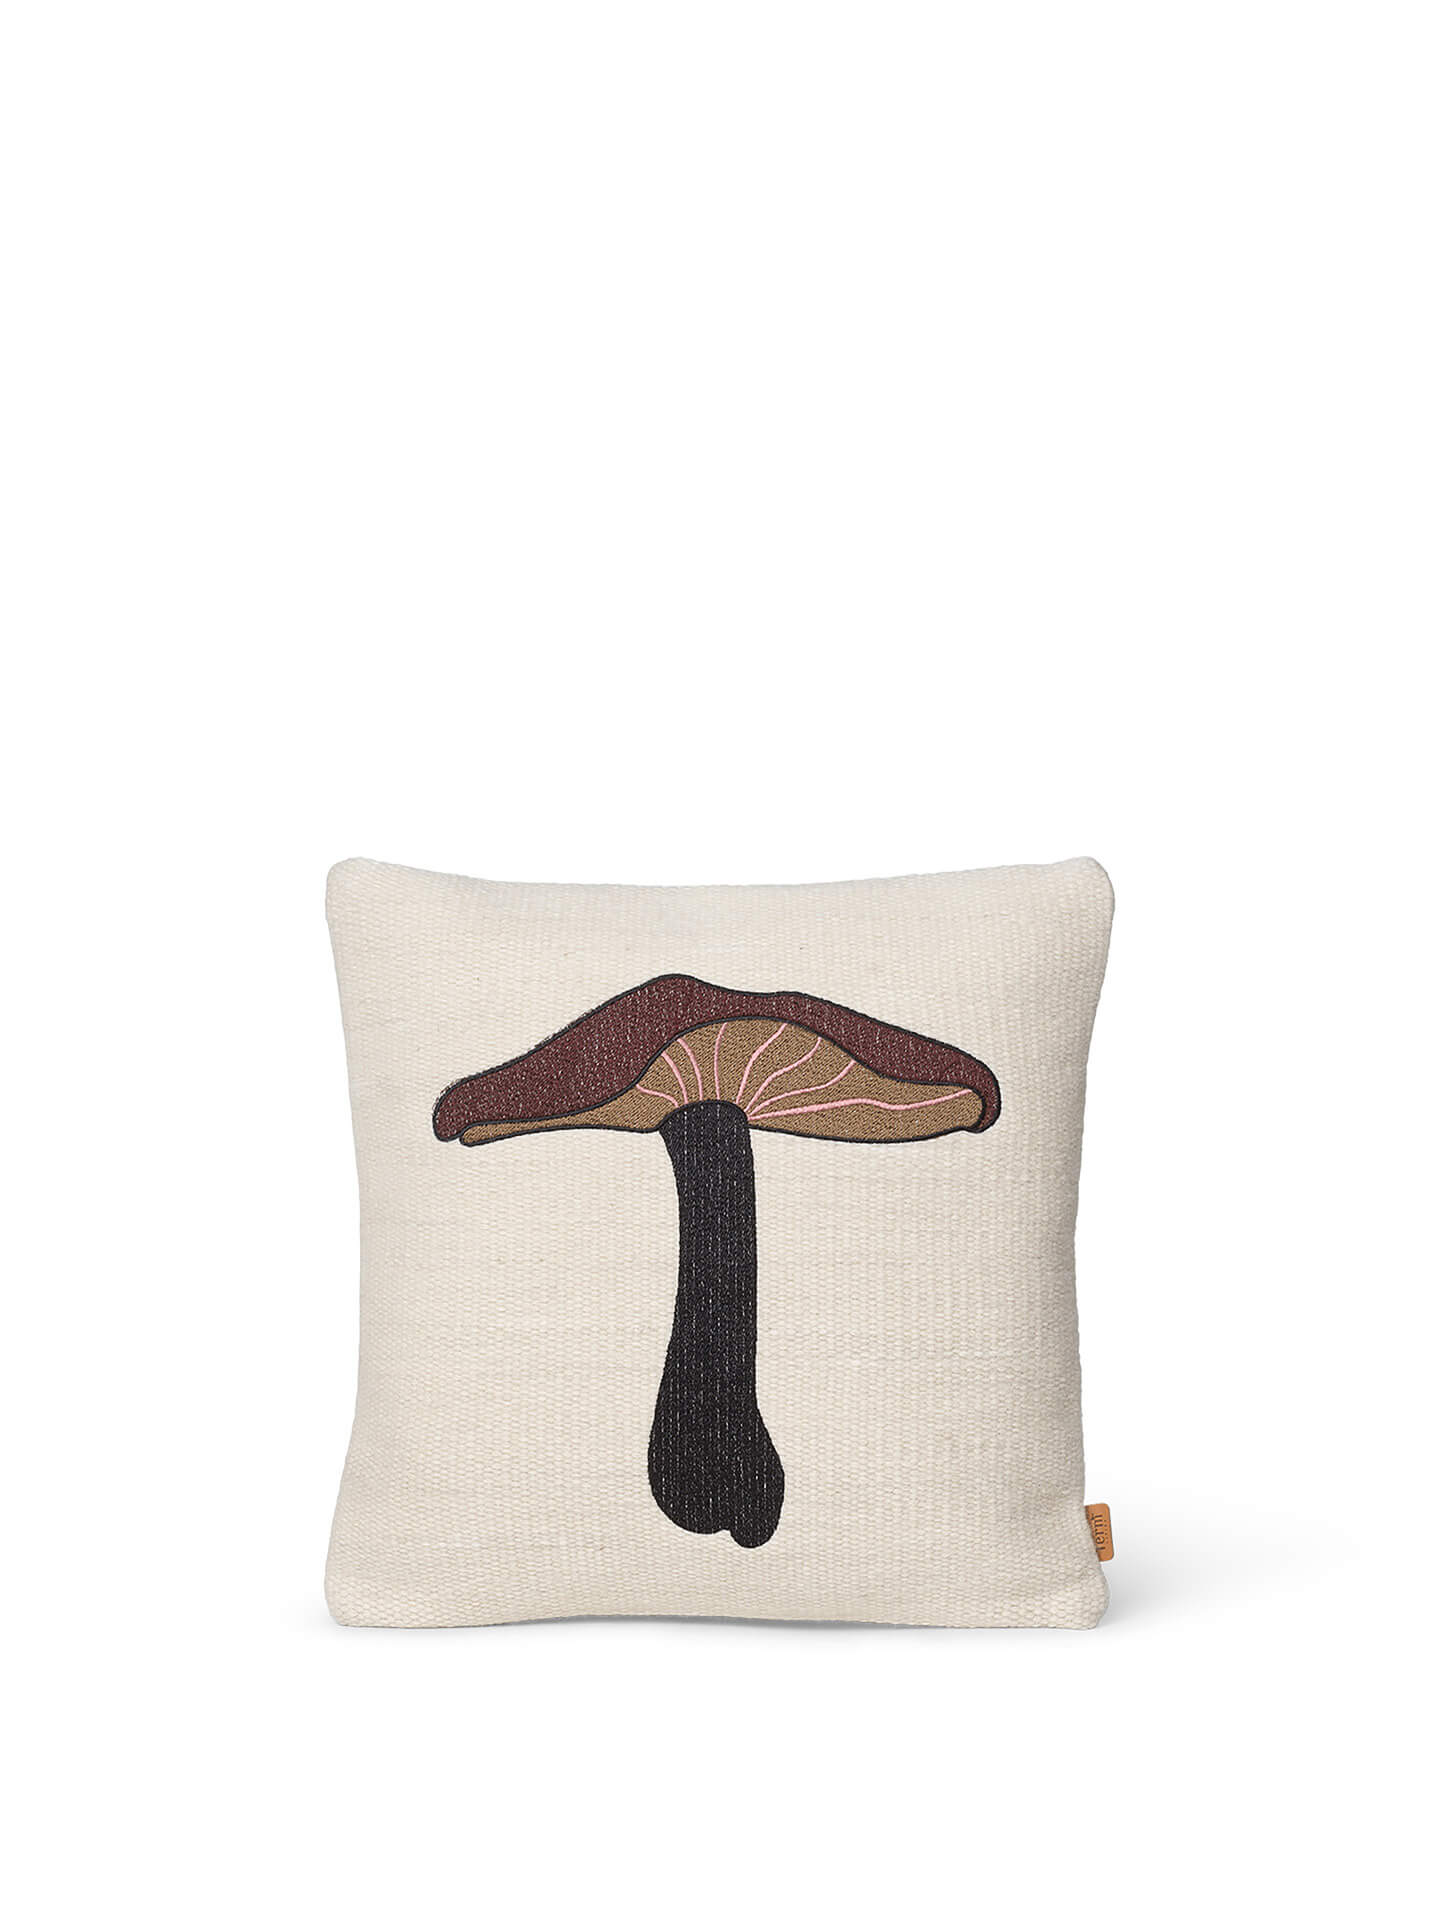 Forest Embroidered Cushion | Lactarius | by ferm Living - Lifestory - ferm LIVING